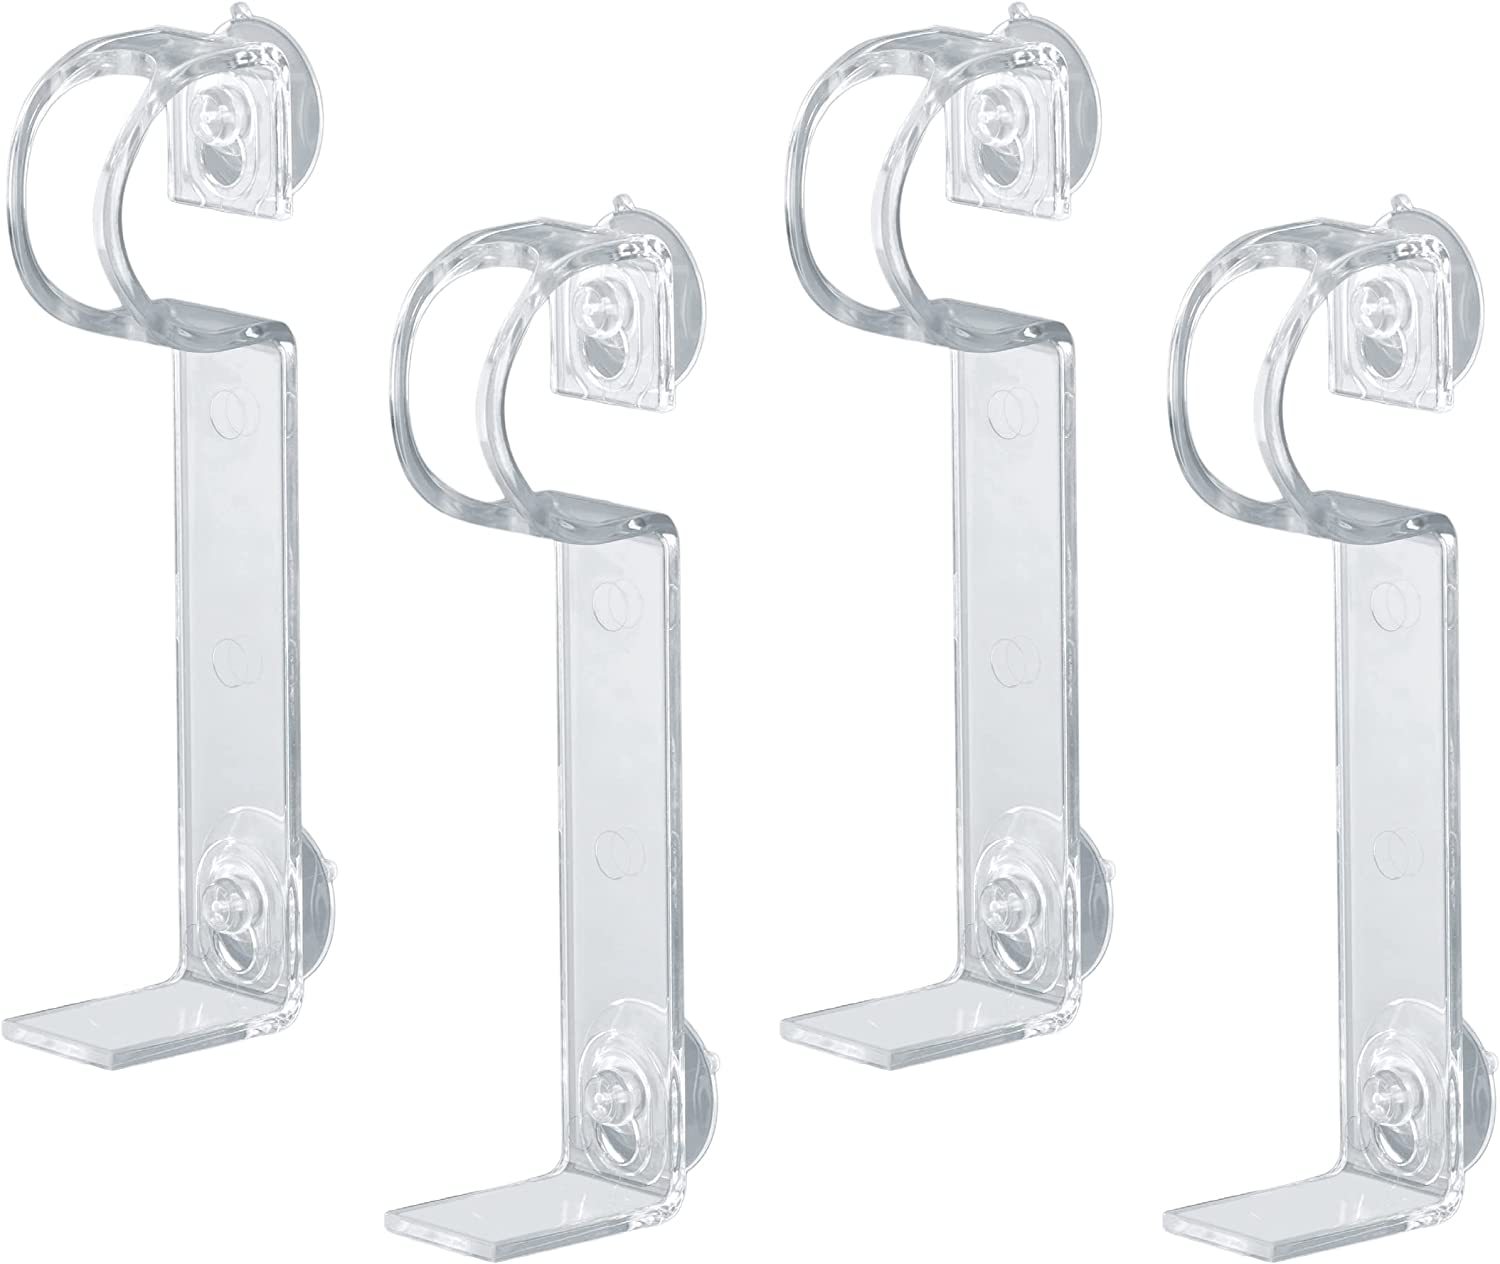 Suction Cup Window Candle Holders Set of 4